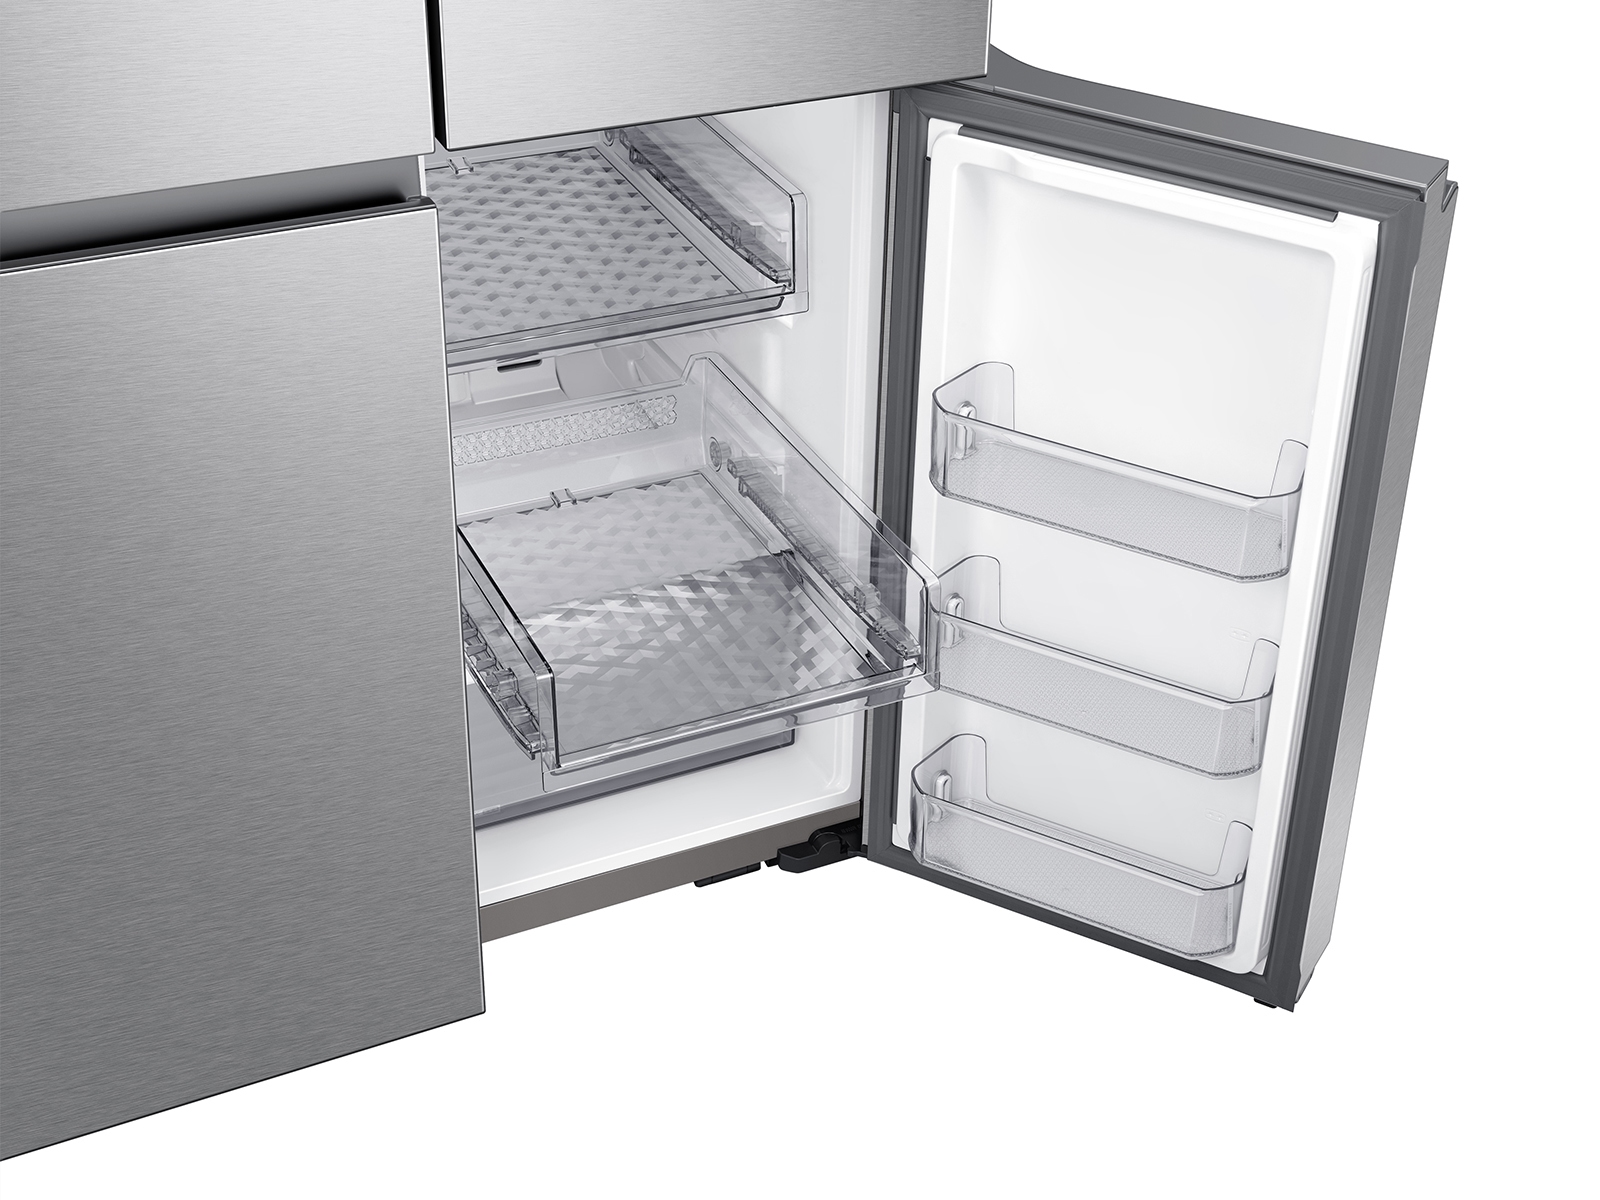 Thumbnail image of 29 cu. ft. Smart 4-Door Flex™ Refrigerator with Beverage Center and Dual Ice Maker in Stainless Steel